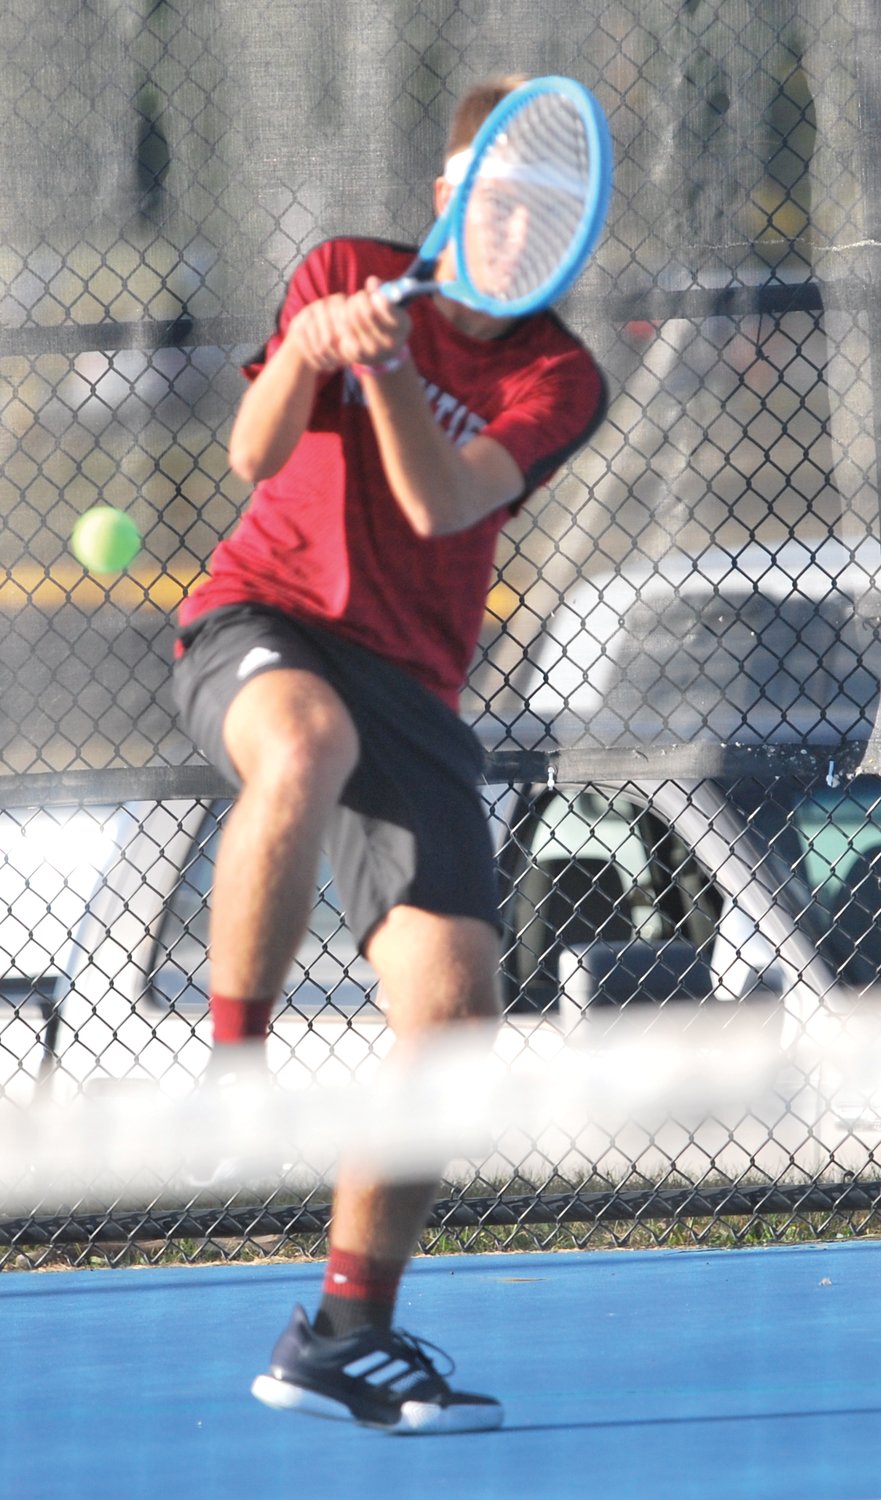 Southmont’s Adam Cox defeated Parke Heritage’s Evan James 6-1, 6-1 at No. 1 singles in the sectional on Wednesday.